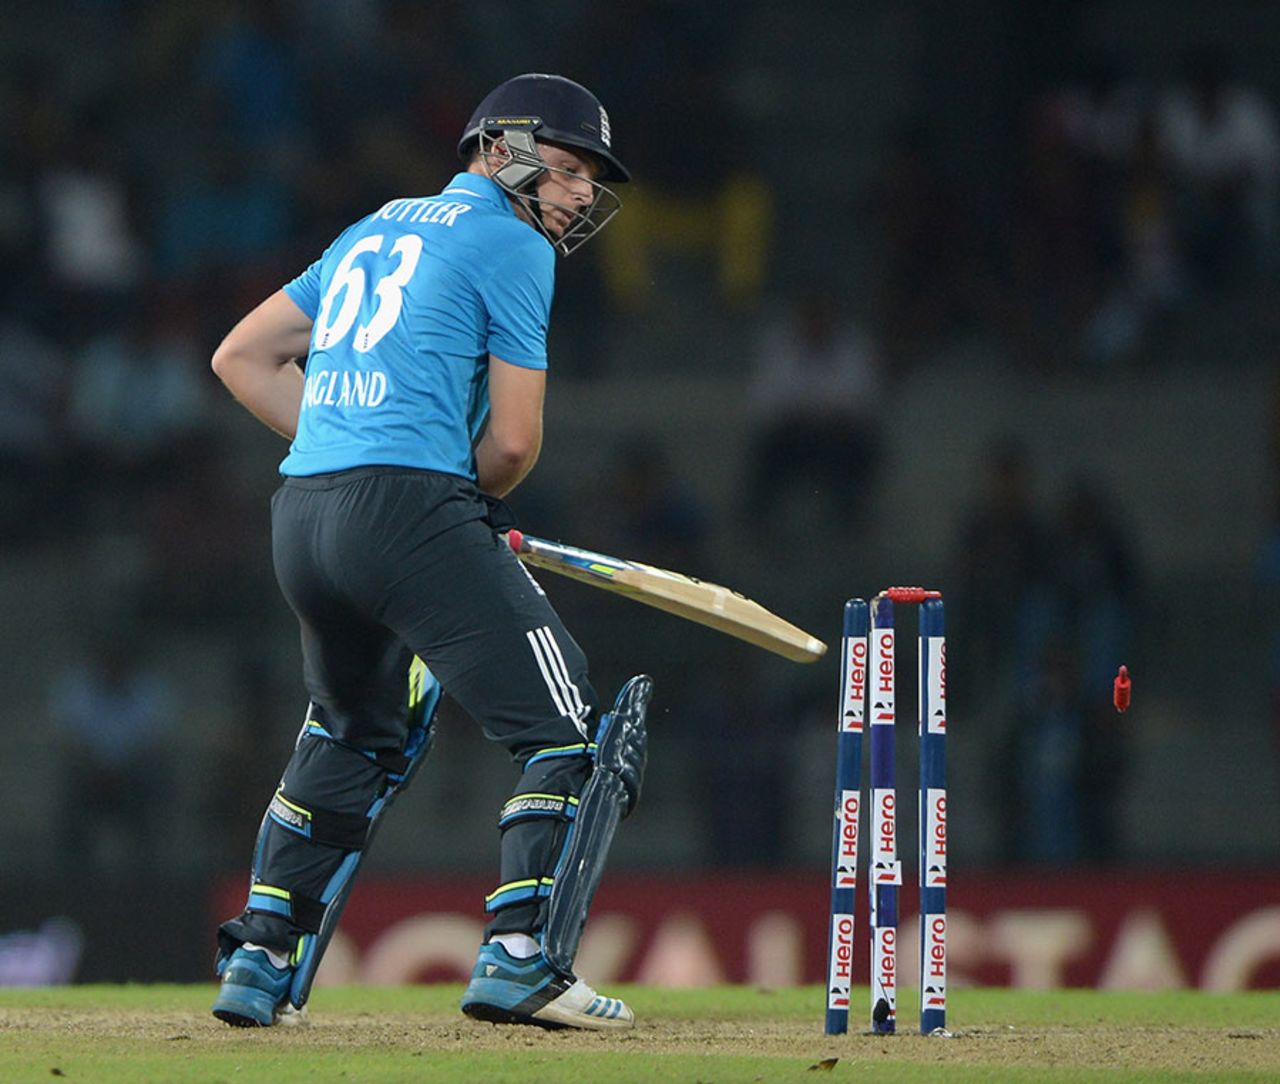 Jos Buttler dragged into his stumps after a brief flurry, Sri Lanka v England, 1st ODI, Colombo, November 26, 2014